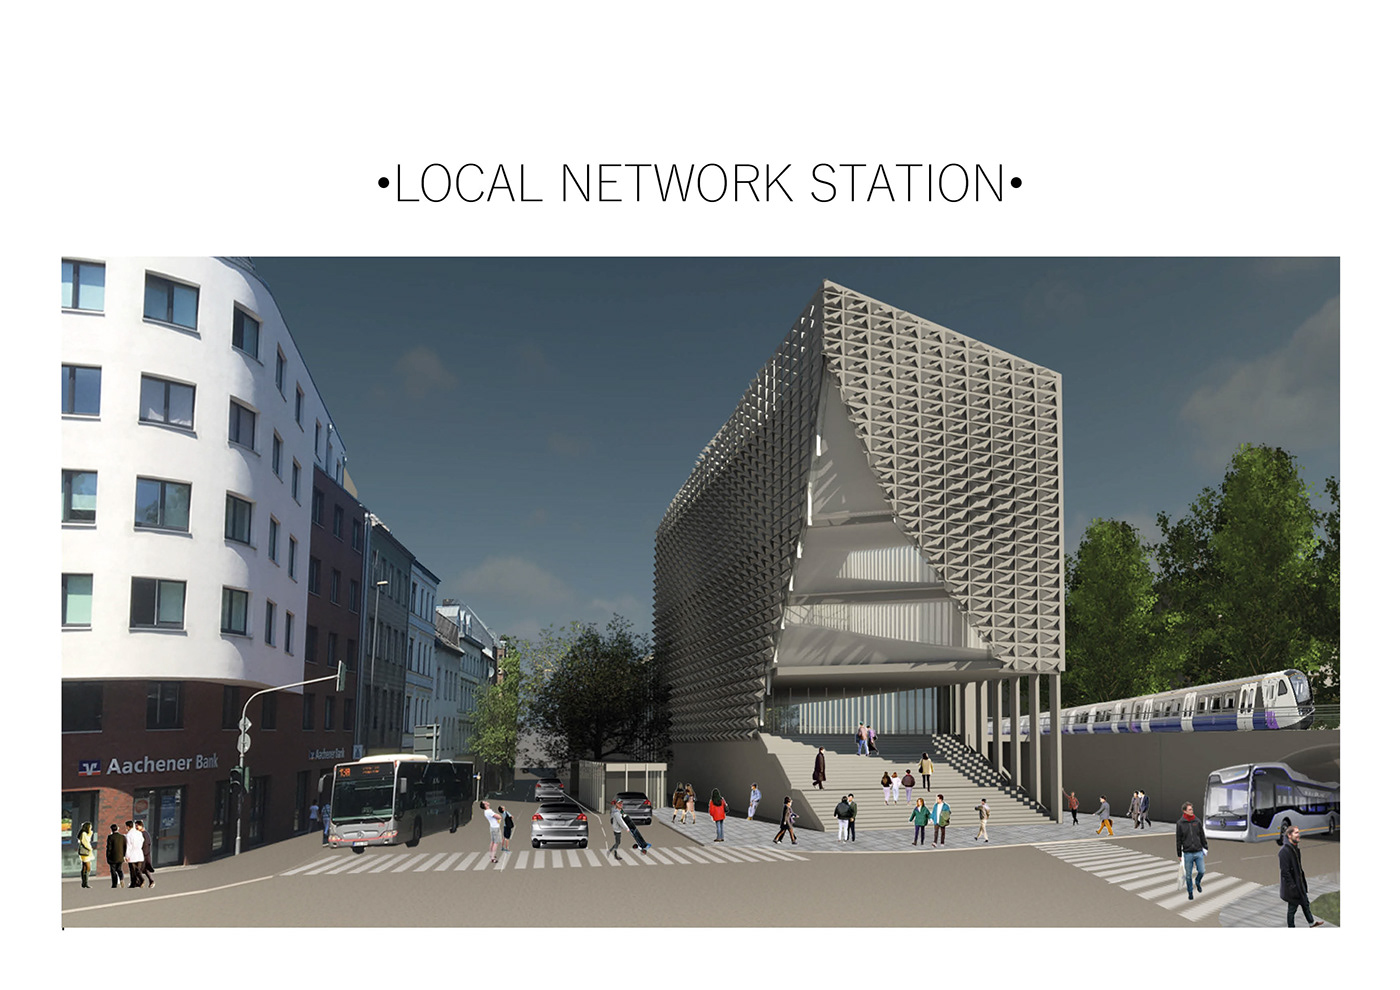 Aachen architecture bachelor elecrticity Hub local network station Smart Sustainable